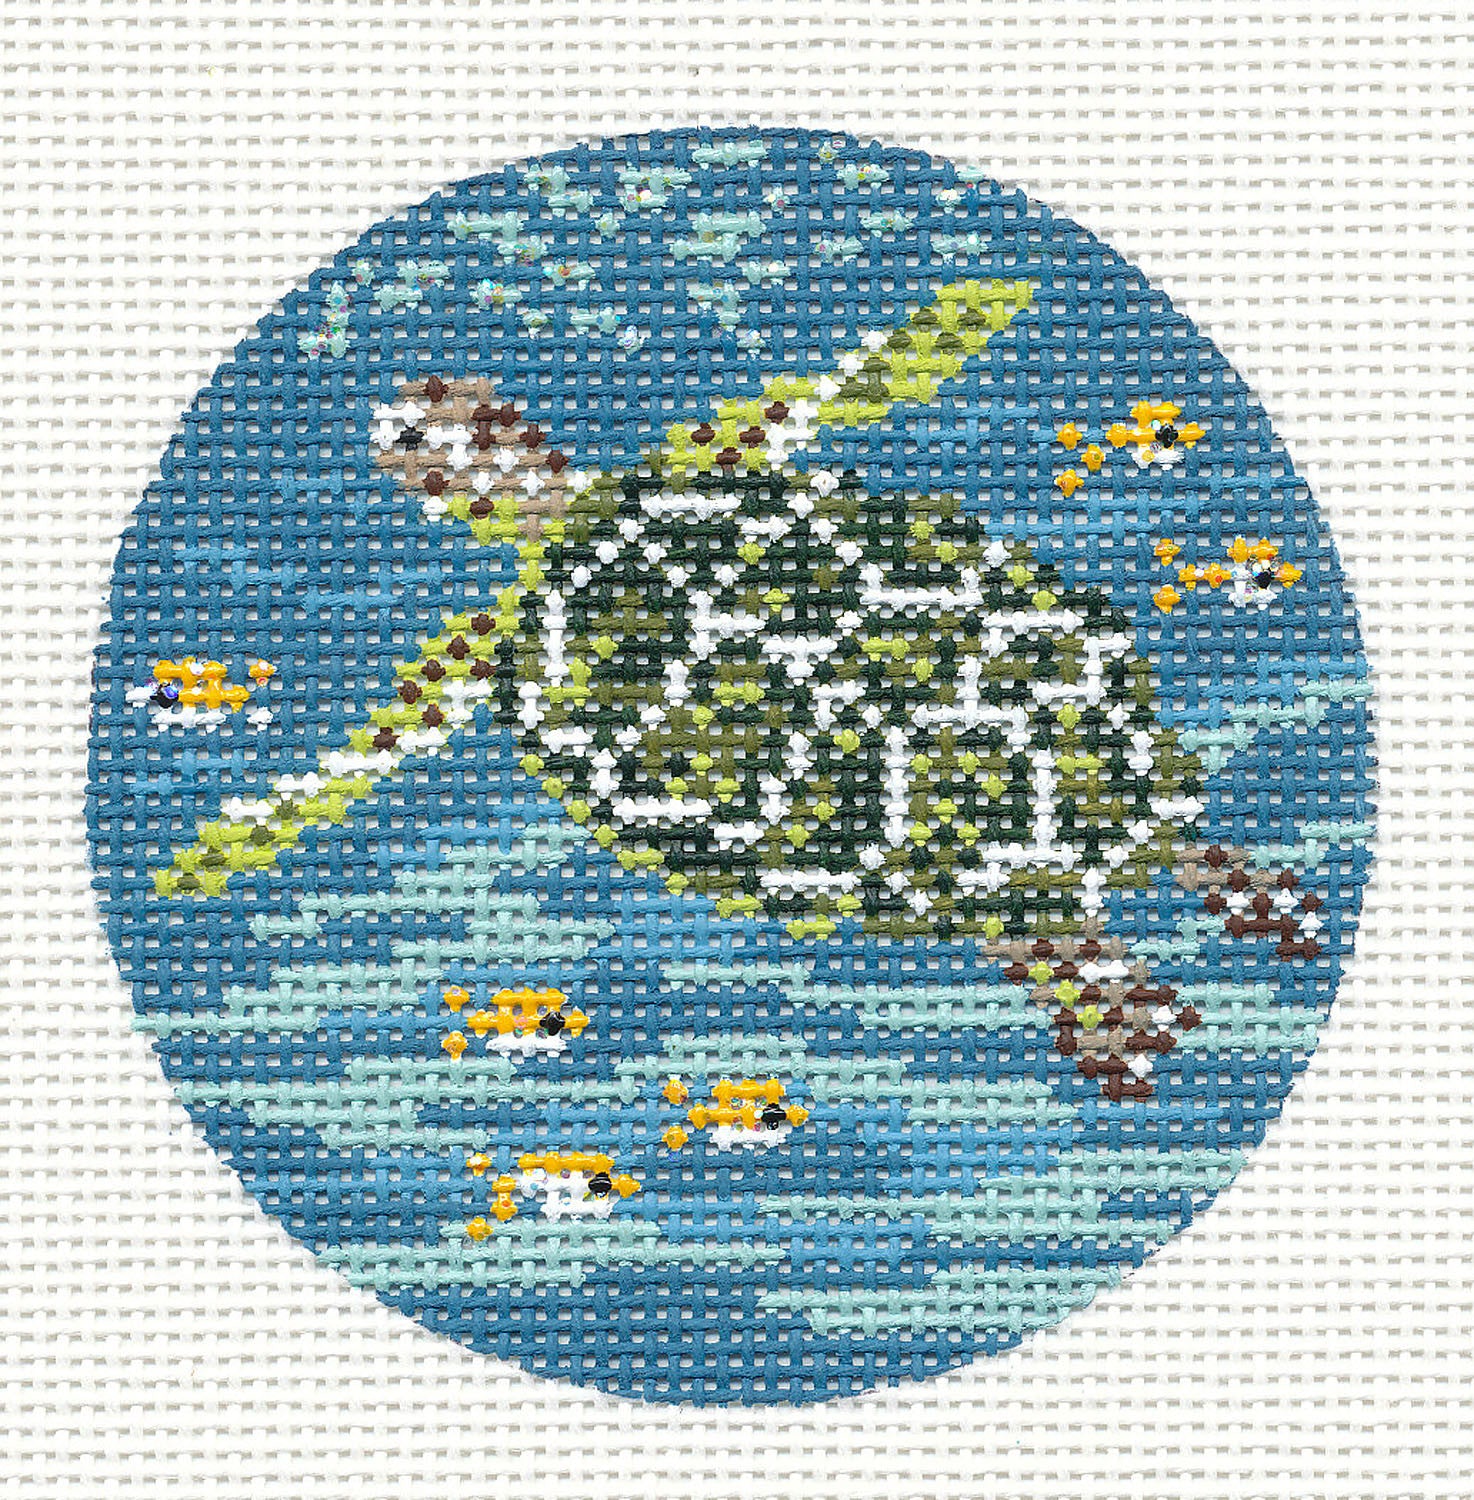 How to Paint Needlepoint Canvas - Likely By Sea